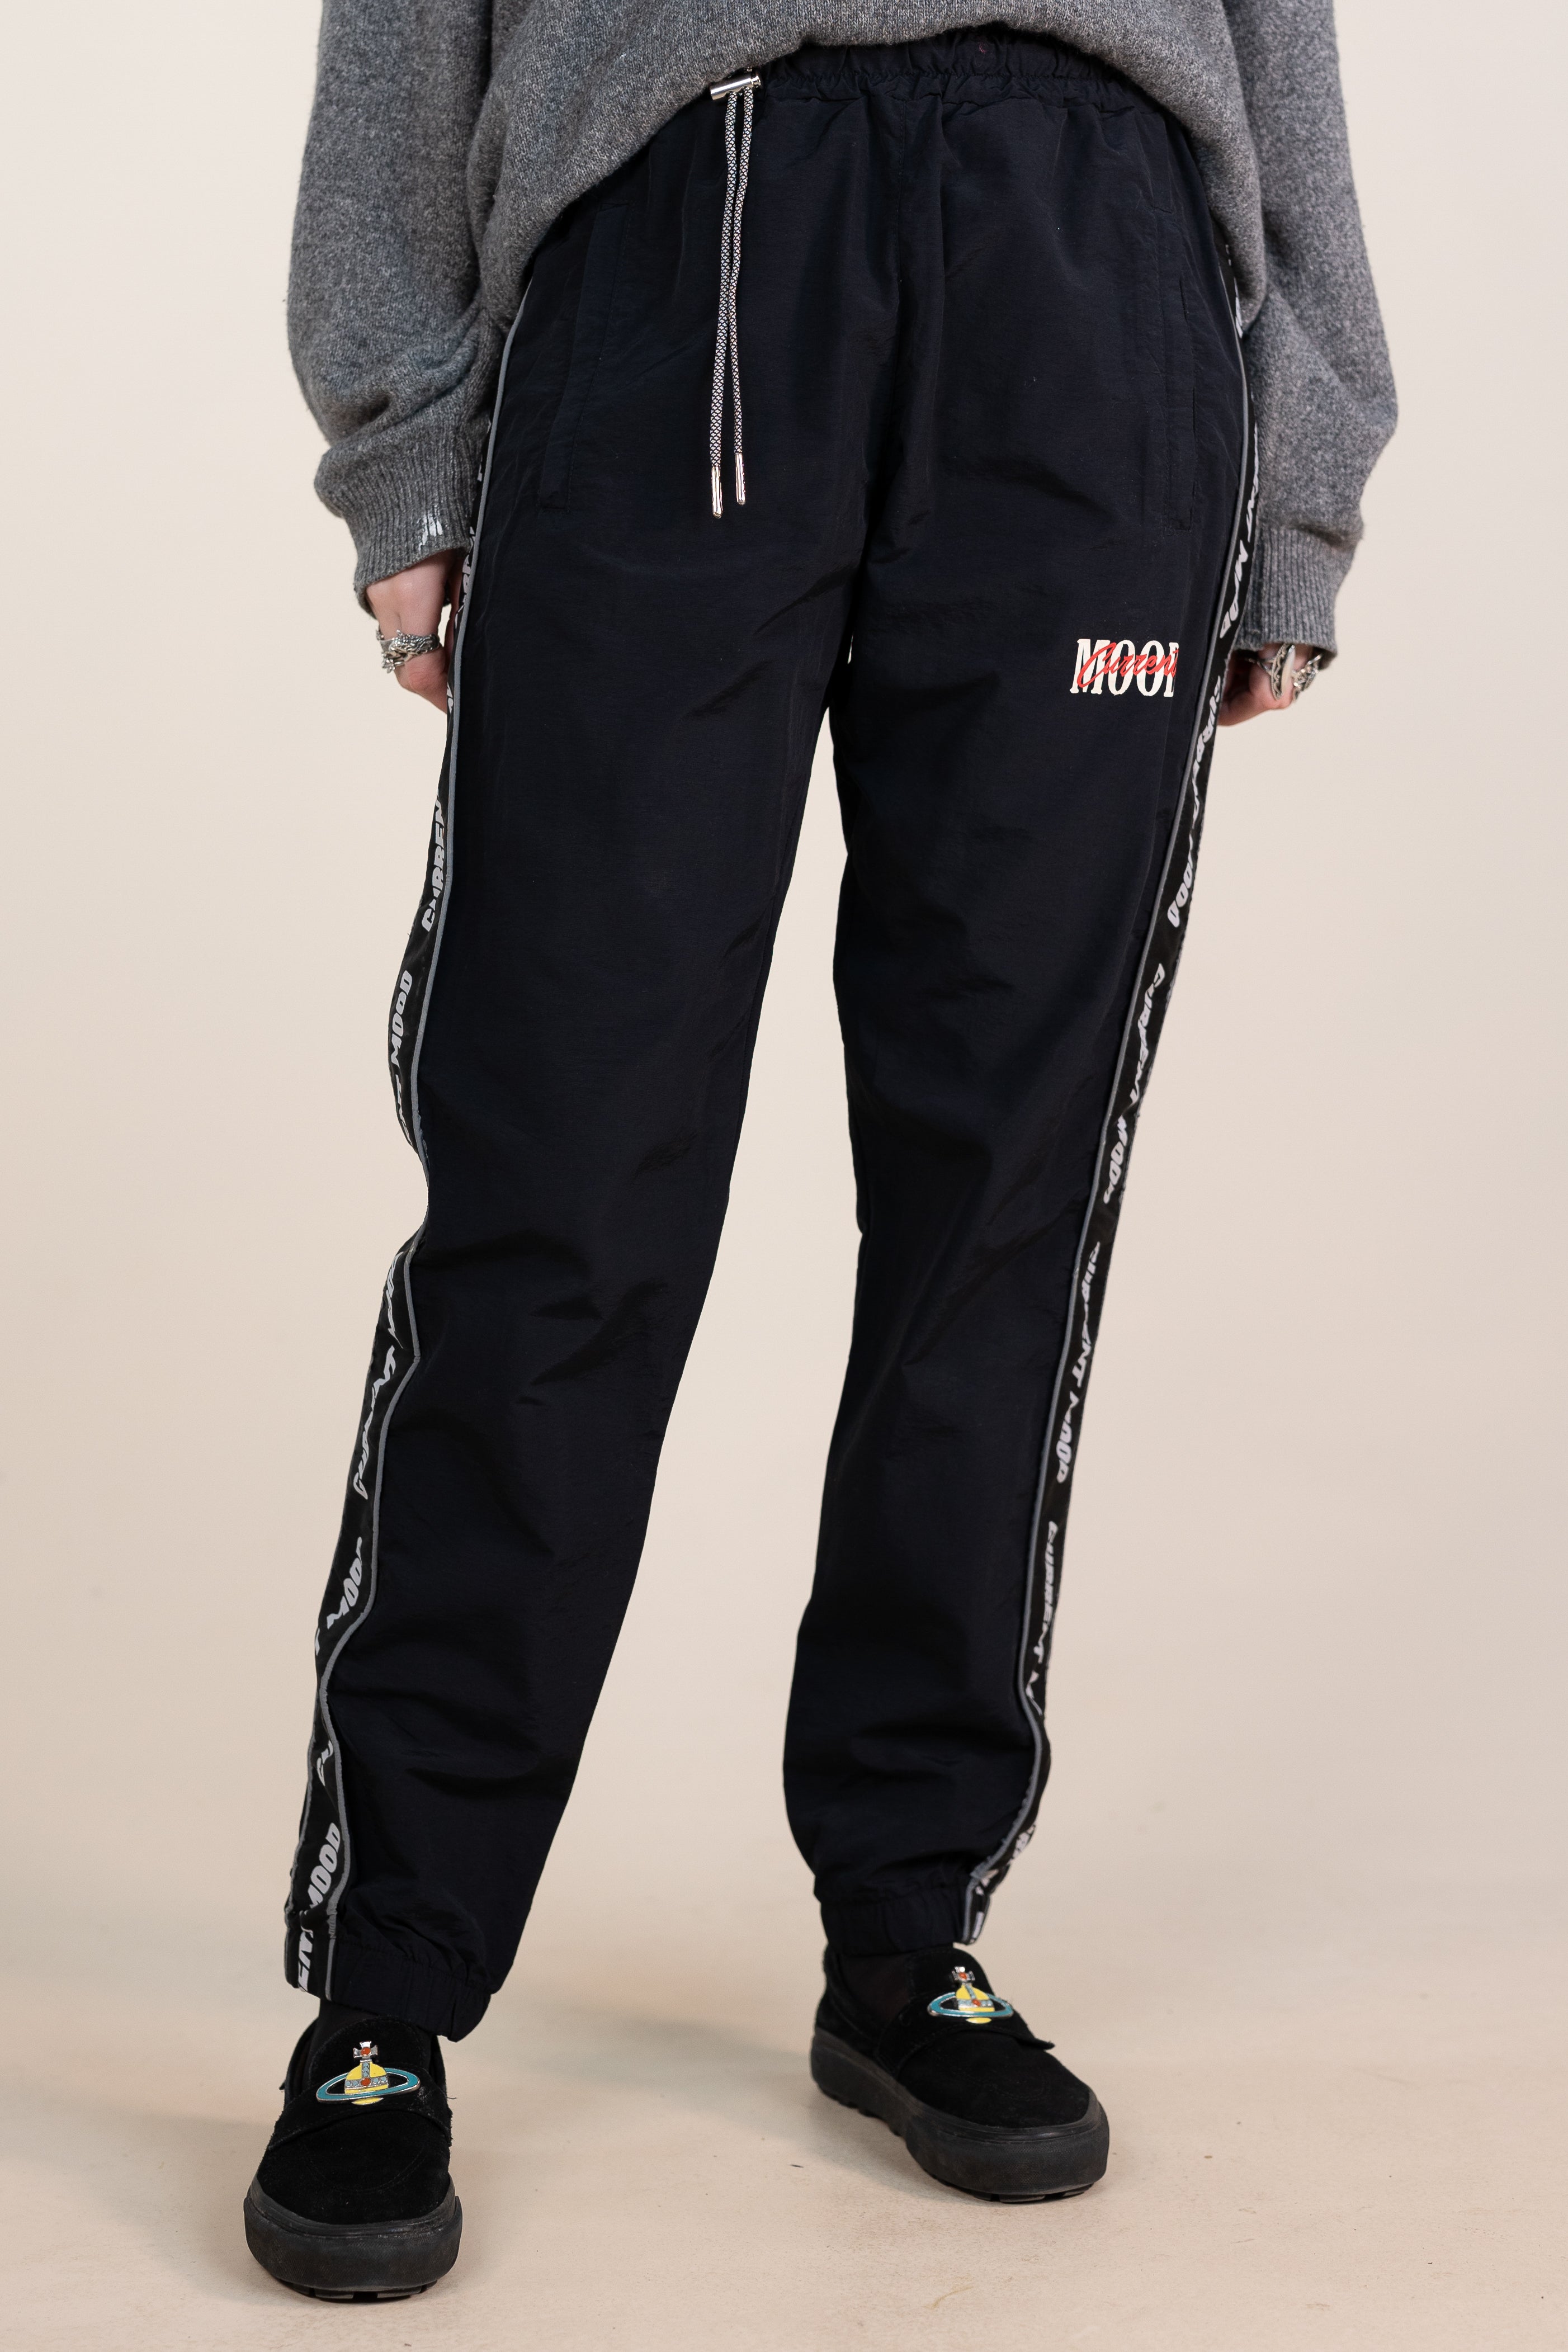 y2k Baggy Pants for Women Striped Mid Waist Loose Sports Trousers 2000s  Aesthetic Sweatpants